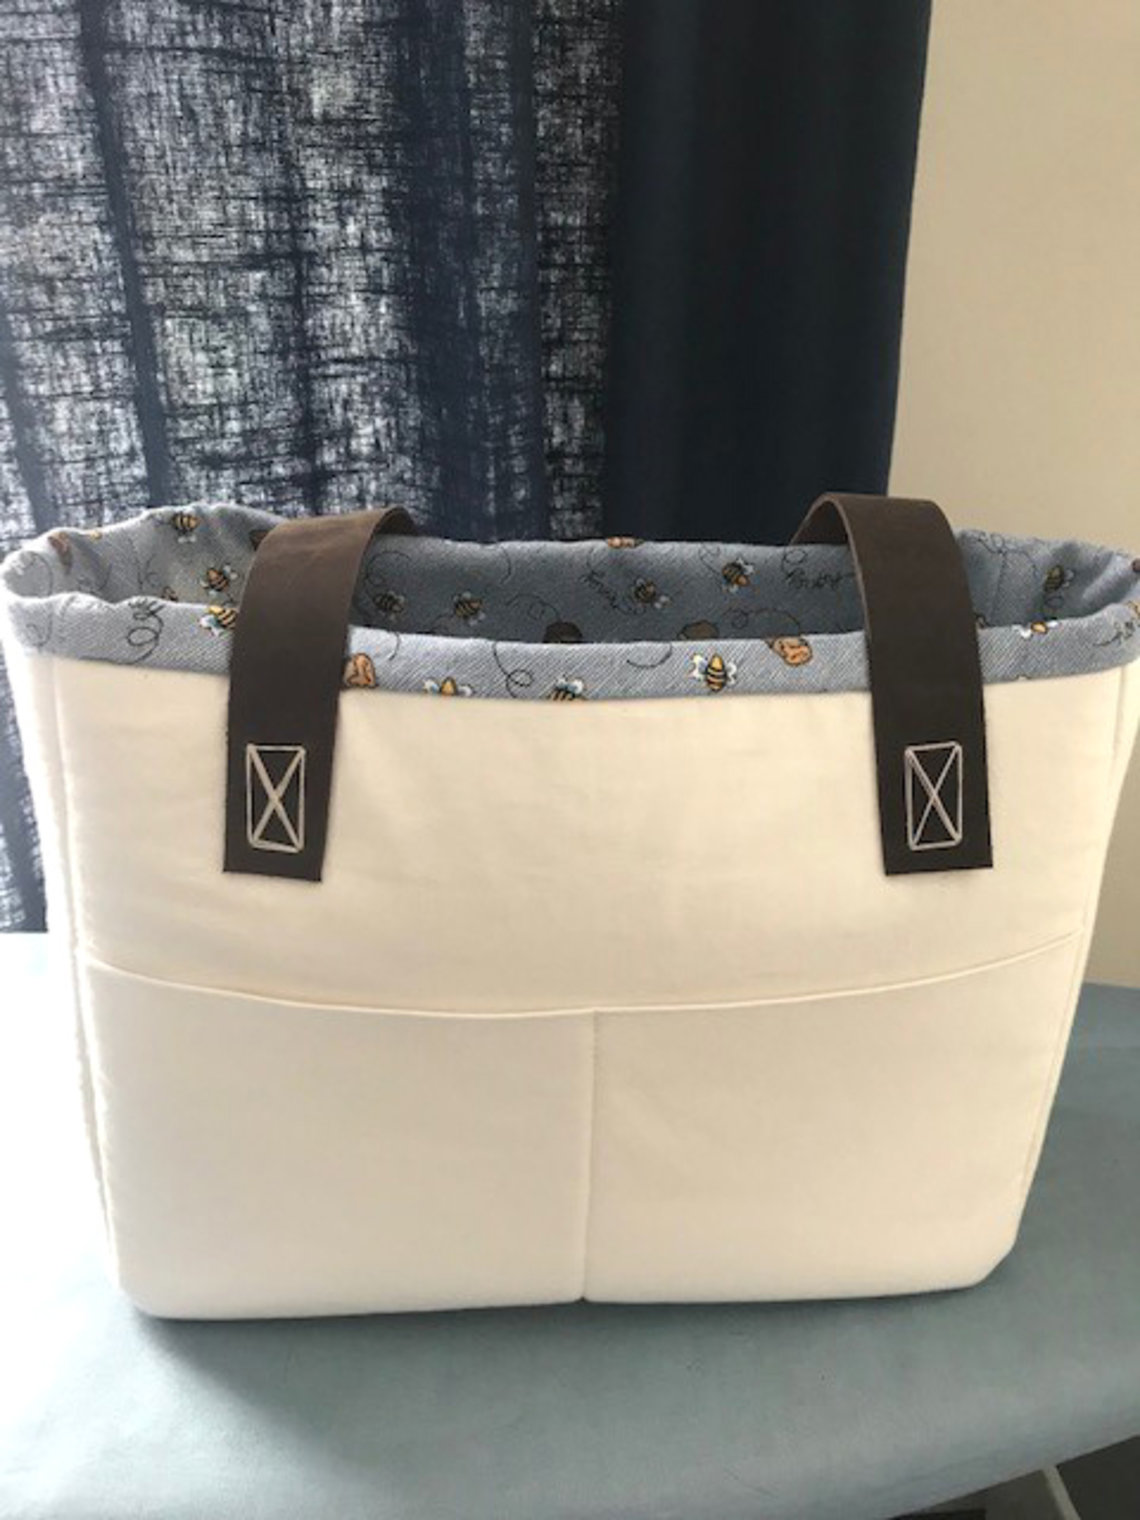 A bag with cat prints